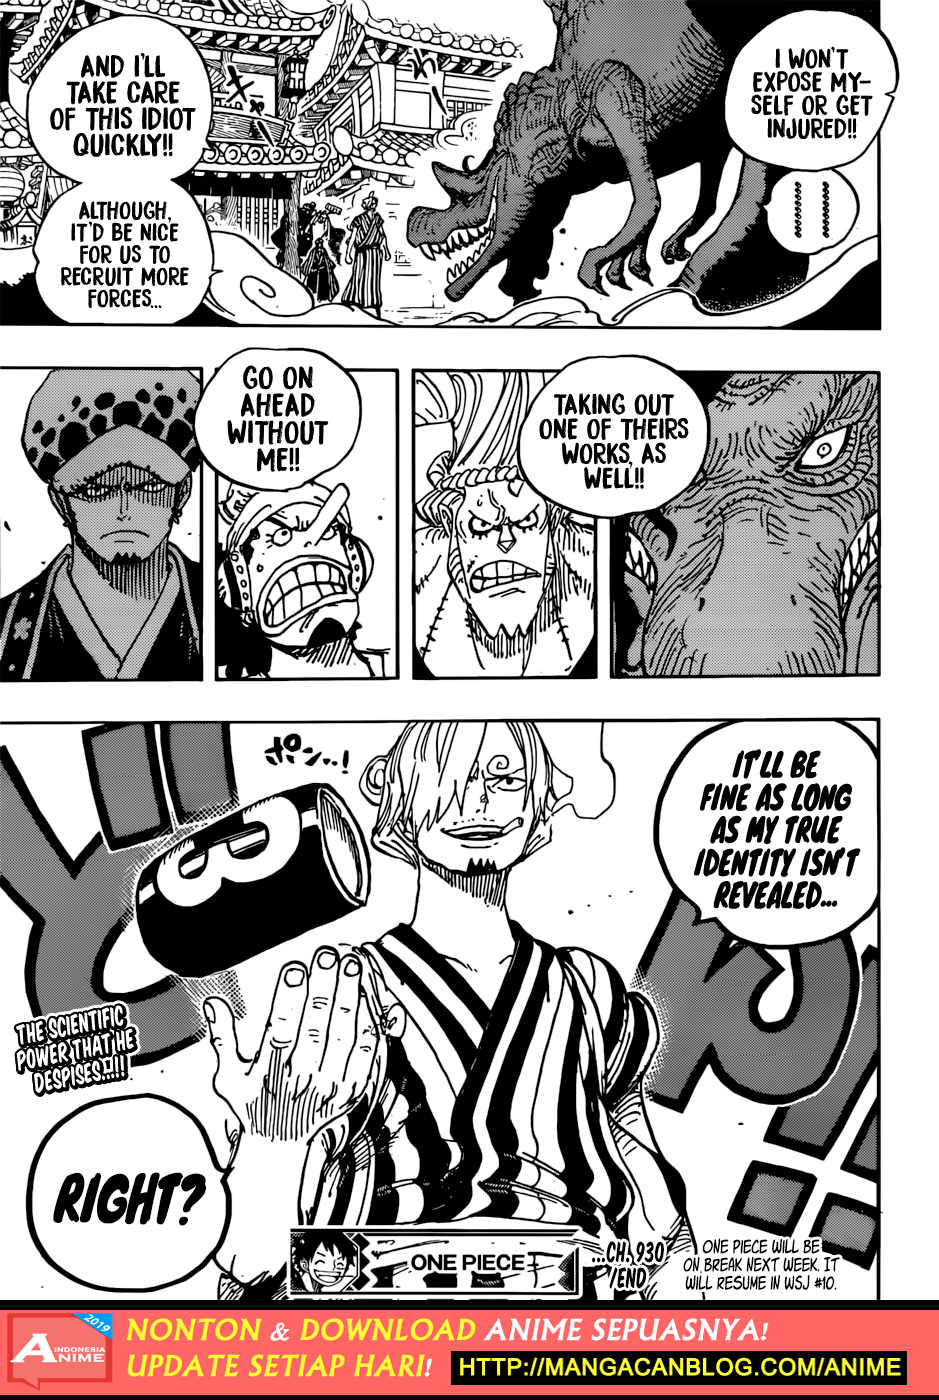 One Piece Chapter 930 Image 15